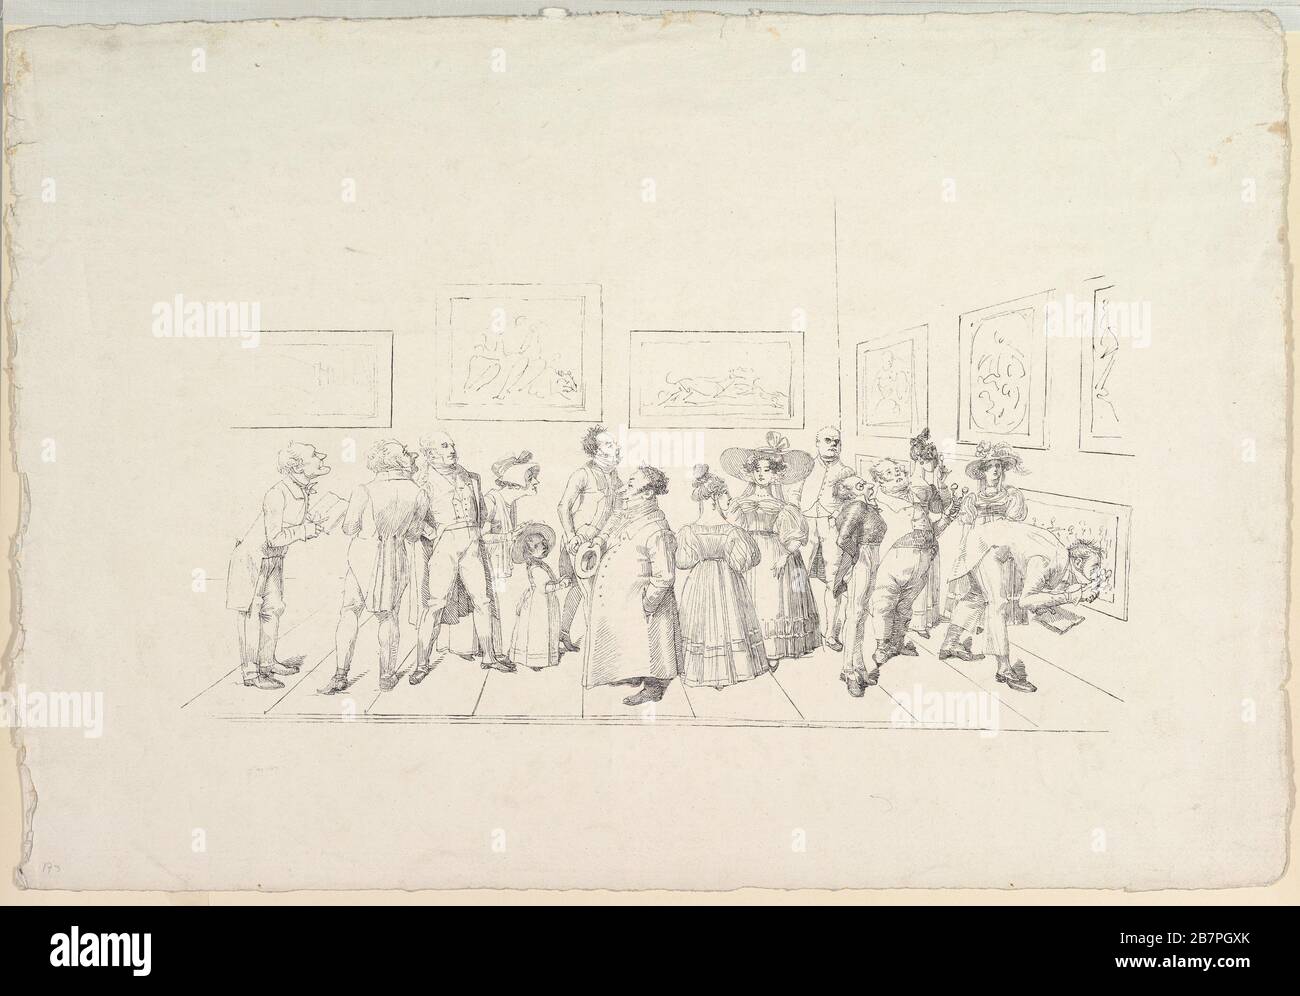 The Public at an Exhibition, 1831. Stockfoto